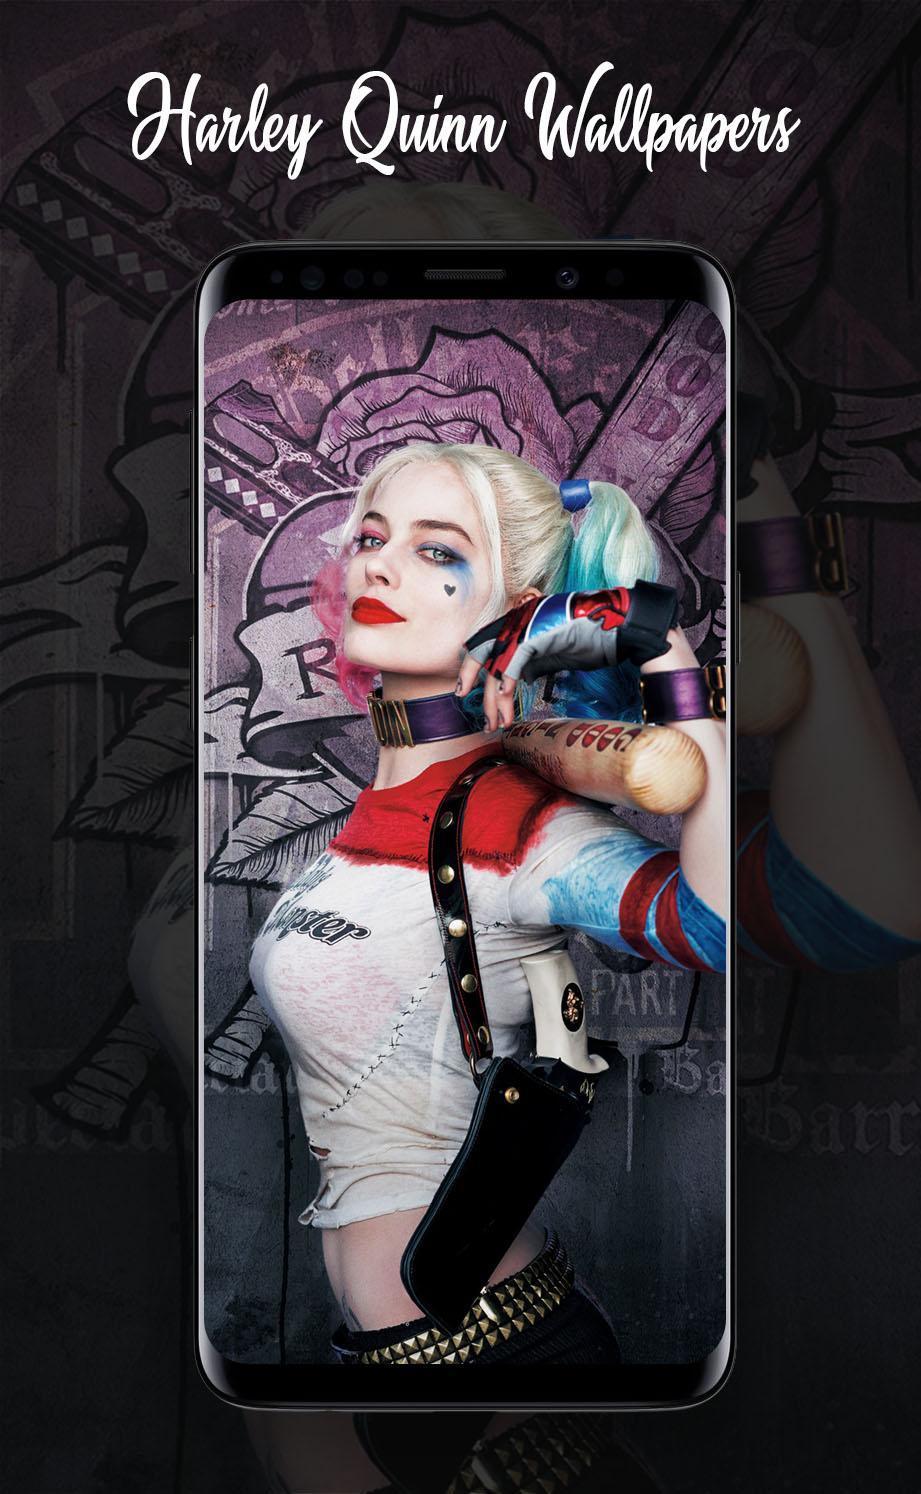 Harley Quinn Wallpaper APK  for Android – Download Harley Quinn Wallpaper  APK Latest Version from 